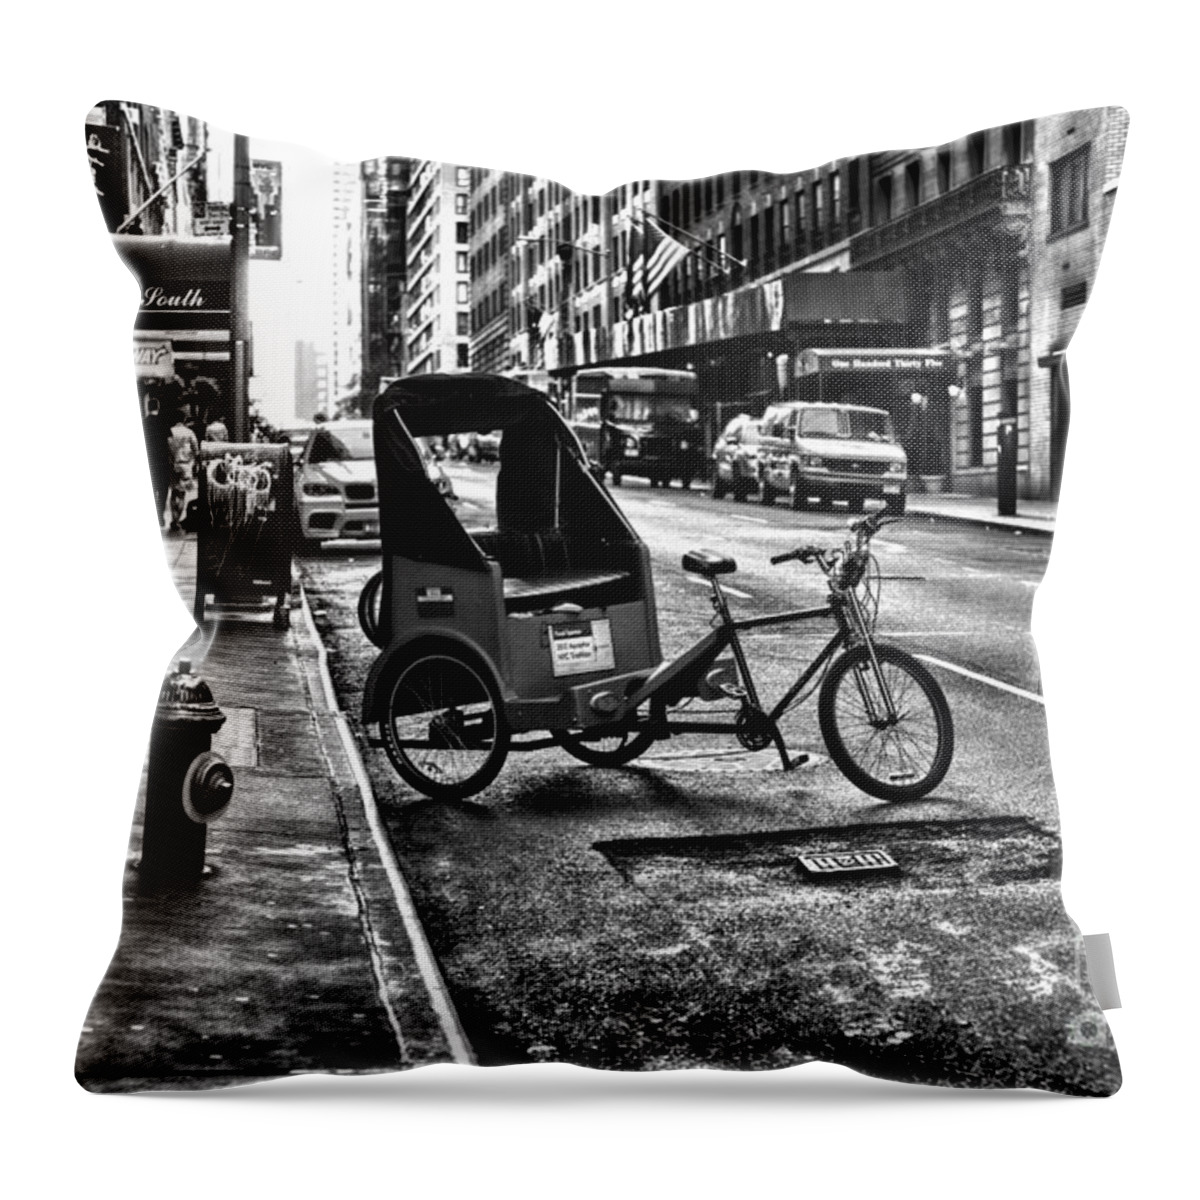 Paul Ward Throw Pillow featuring the photograph New York Park South by Paul Ward